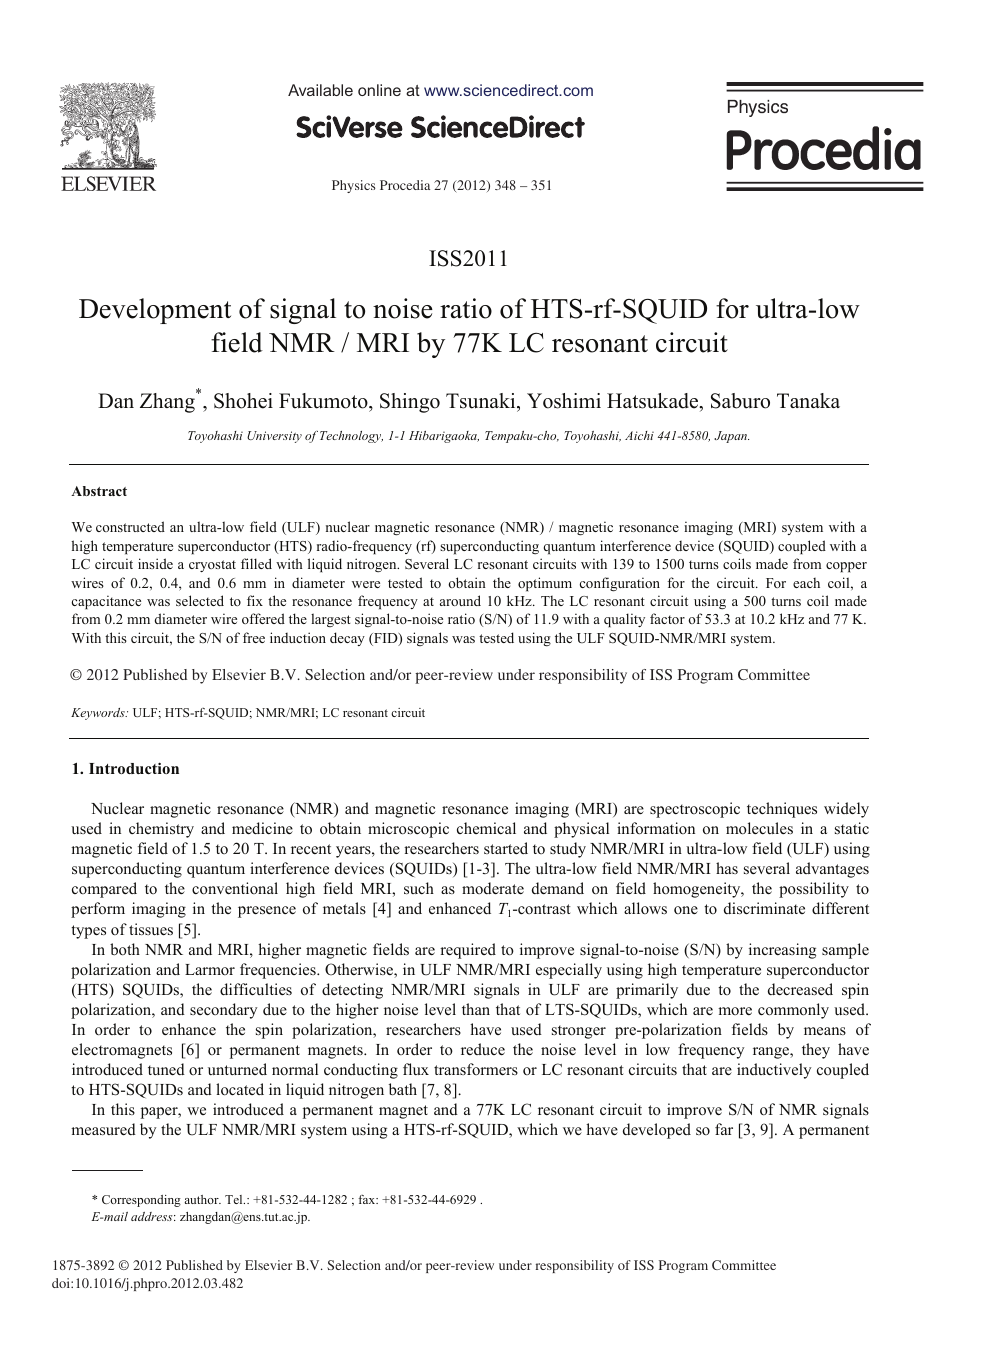 Development Of Signal To Noise Ratio Of Hts Rf Squid For Ultra Low Field Nmr Mri By 77k Lc Resonant Circuit Topic Of Research Paper In Materials Engineering Download Scholarly Article Pdf And